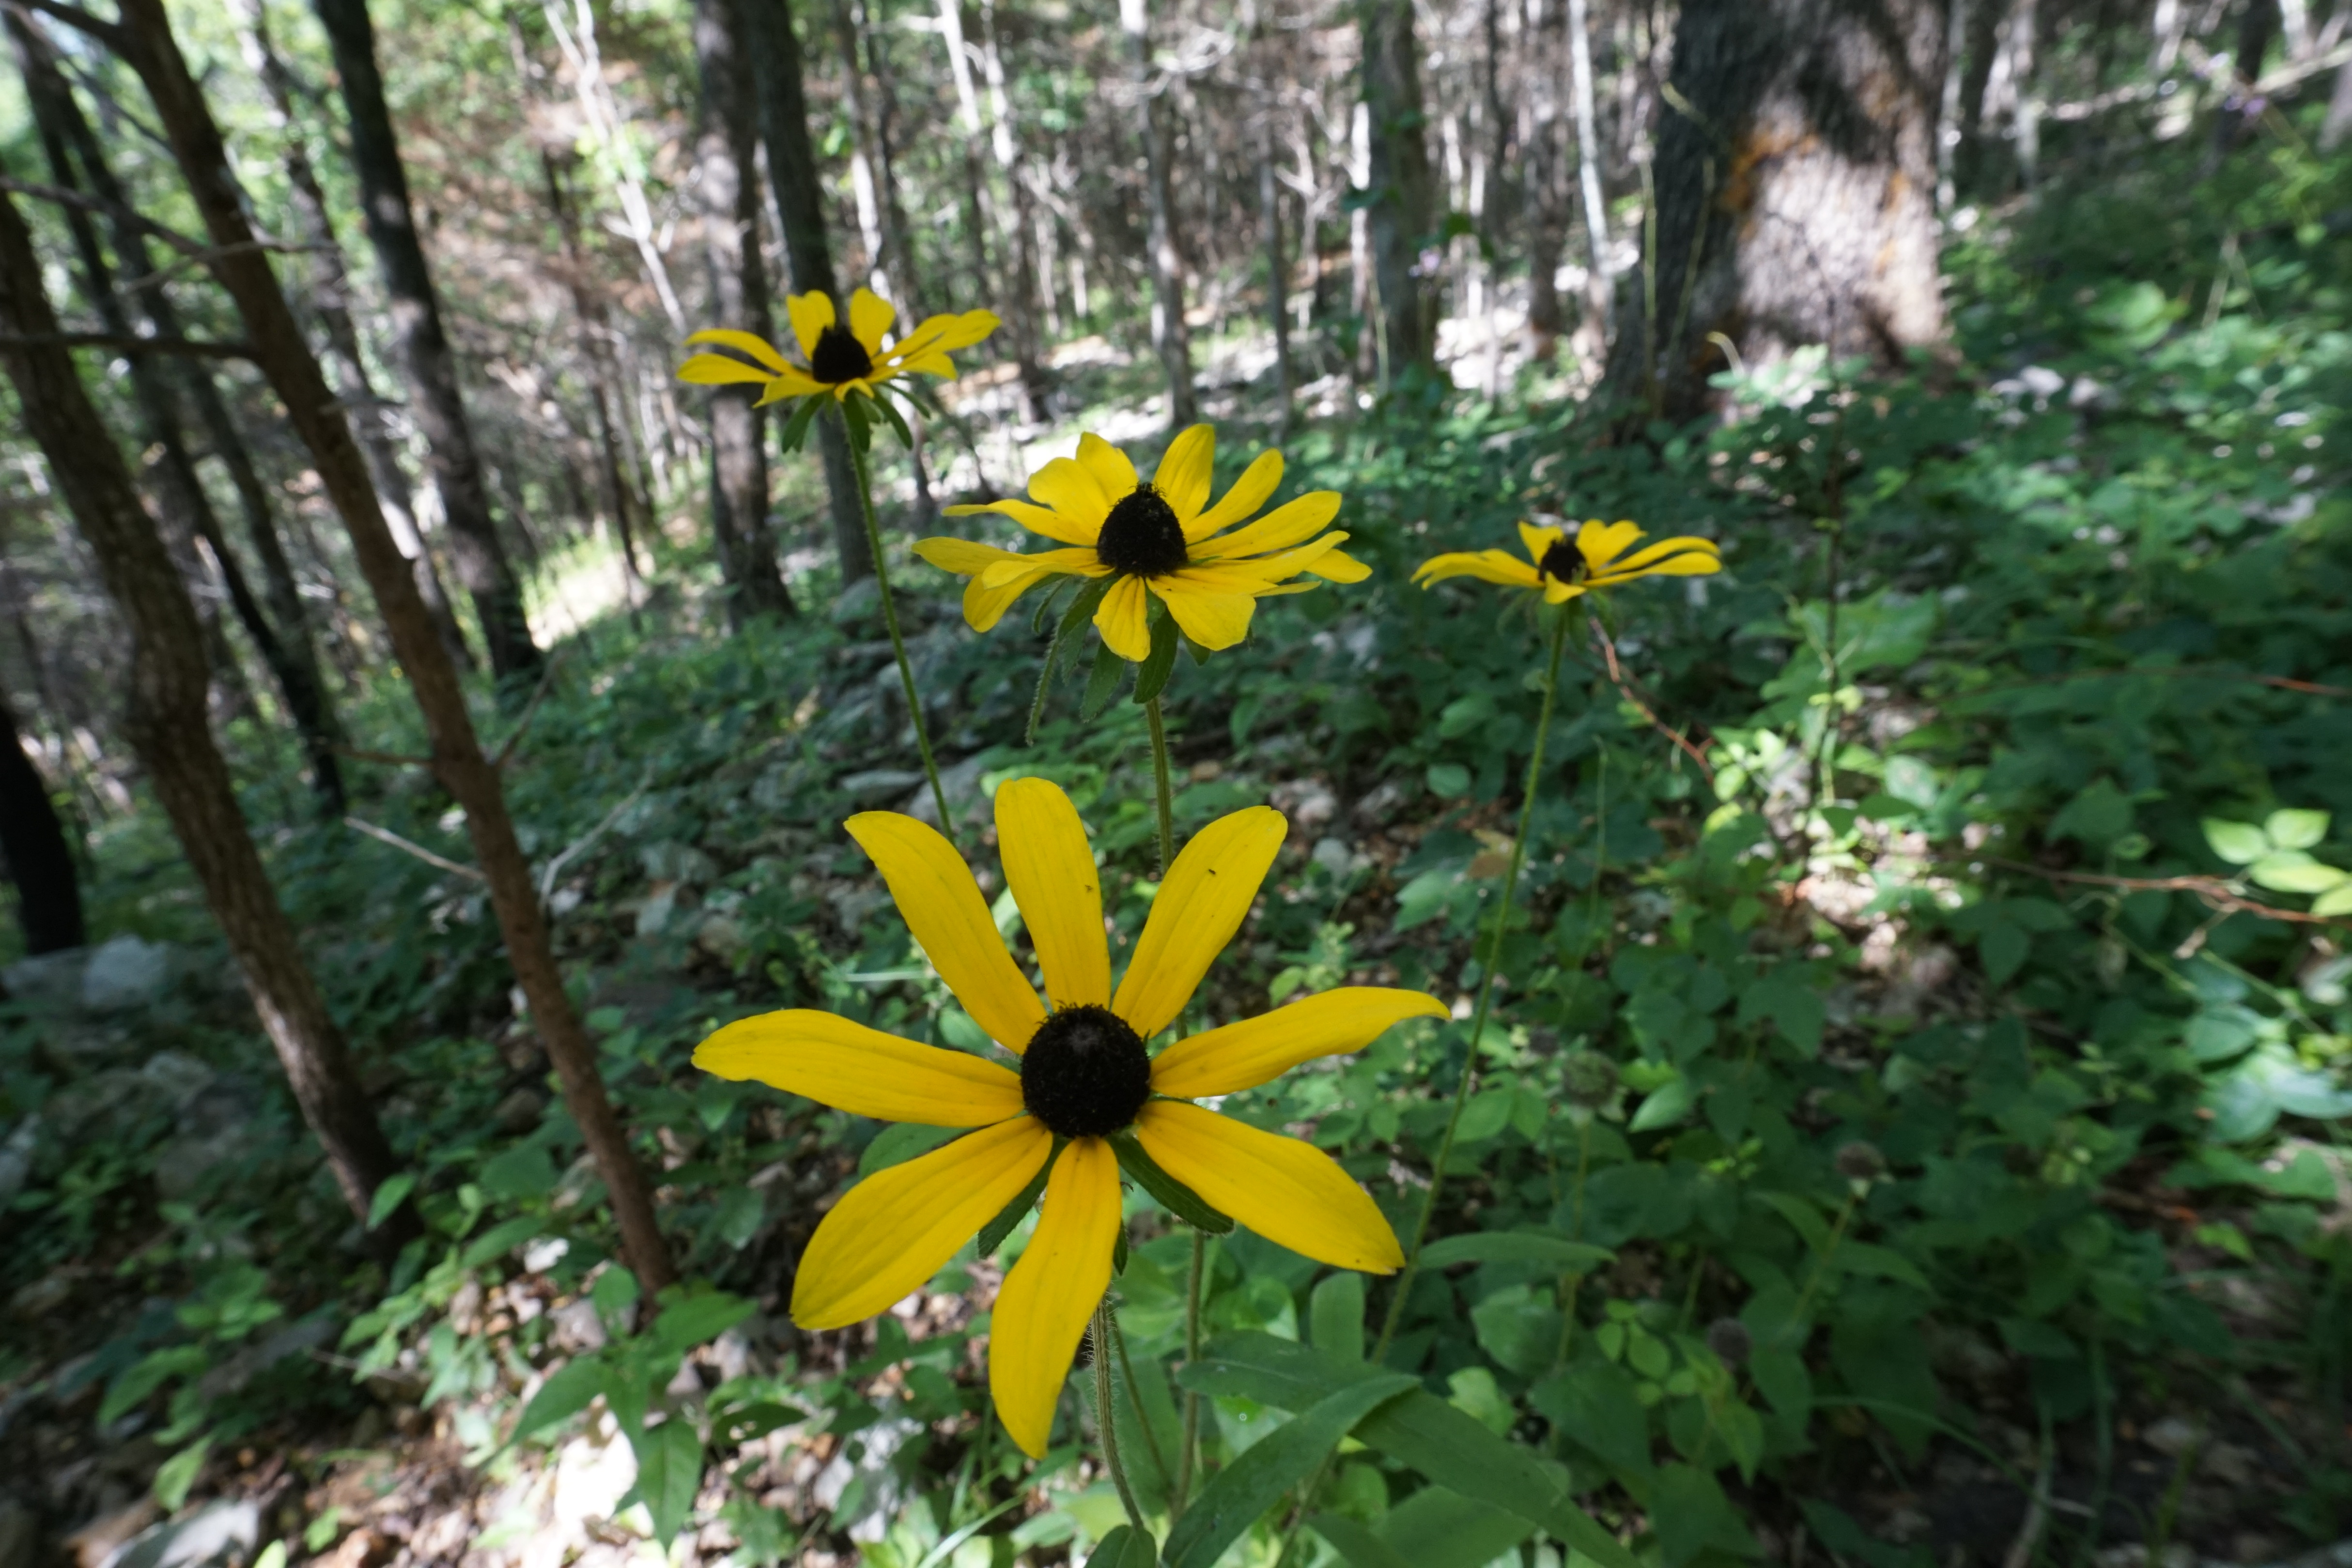 Woodland rudbeckia blooming in Echo Bluff State Park along Painter Ridge Trail.